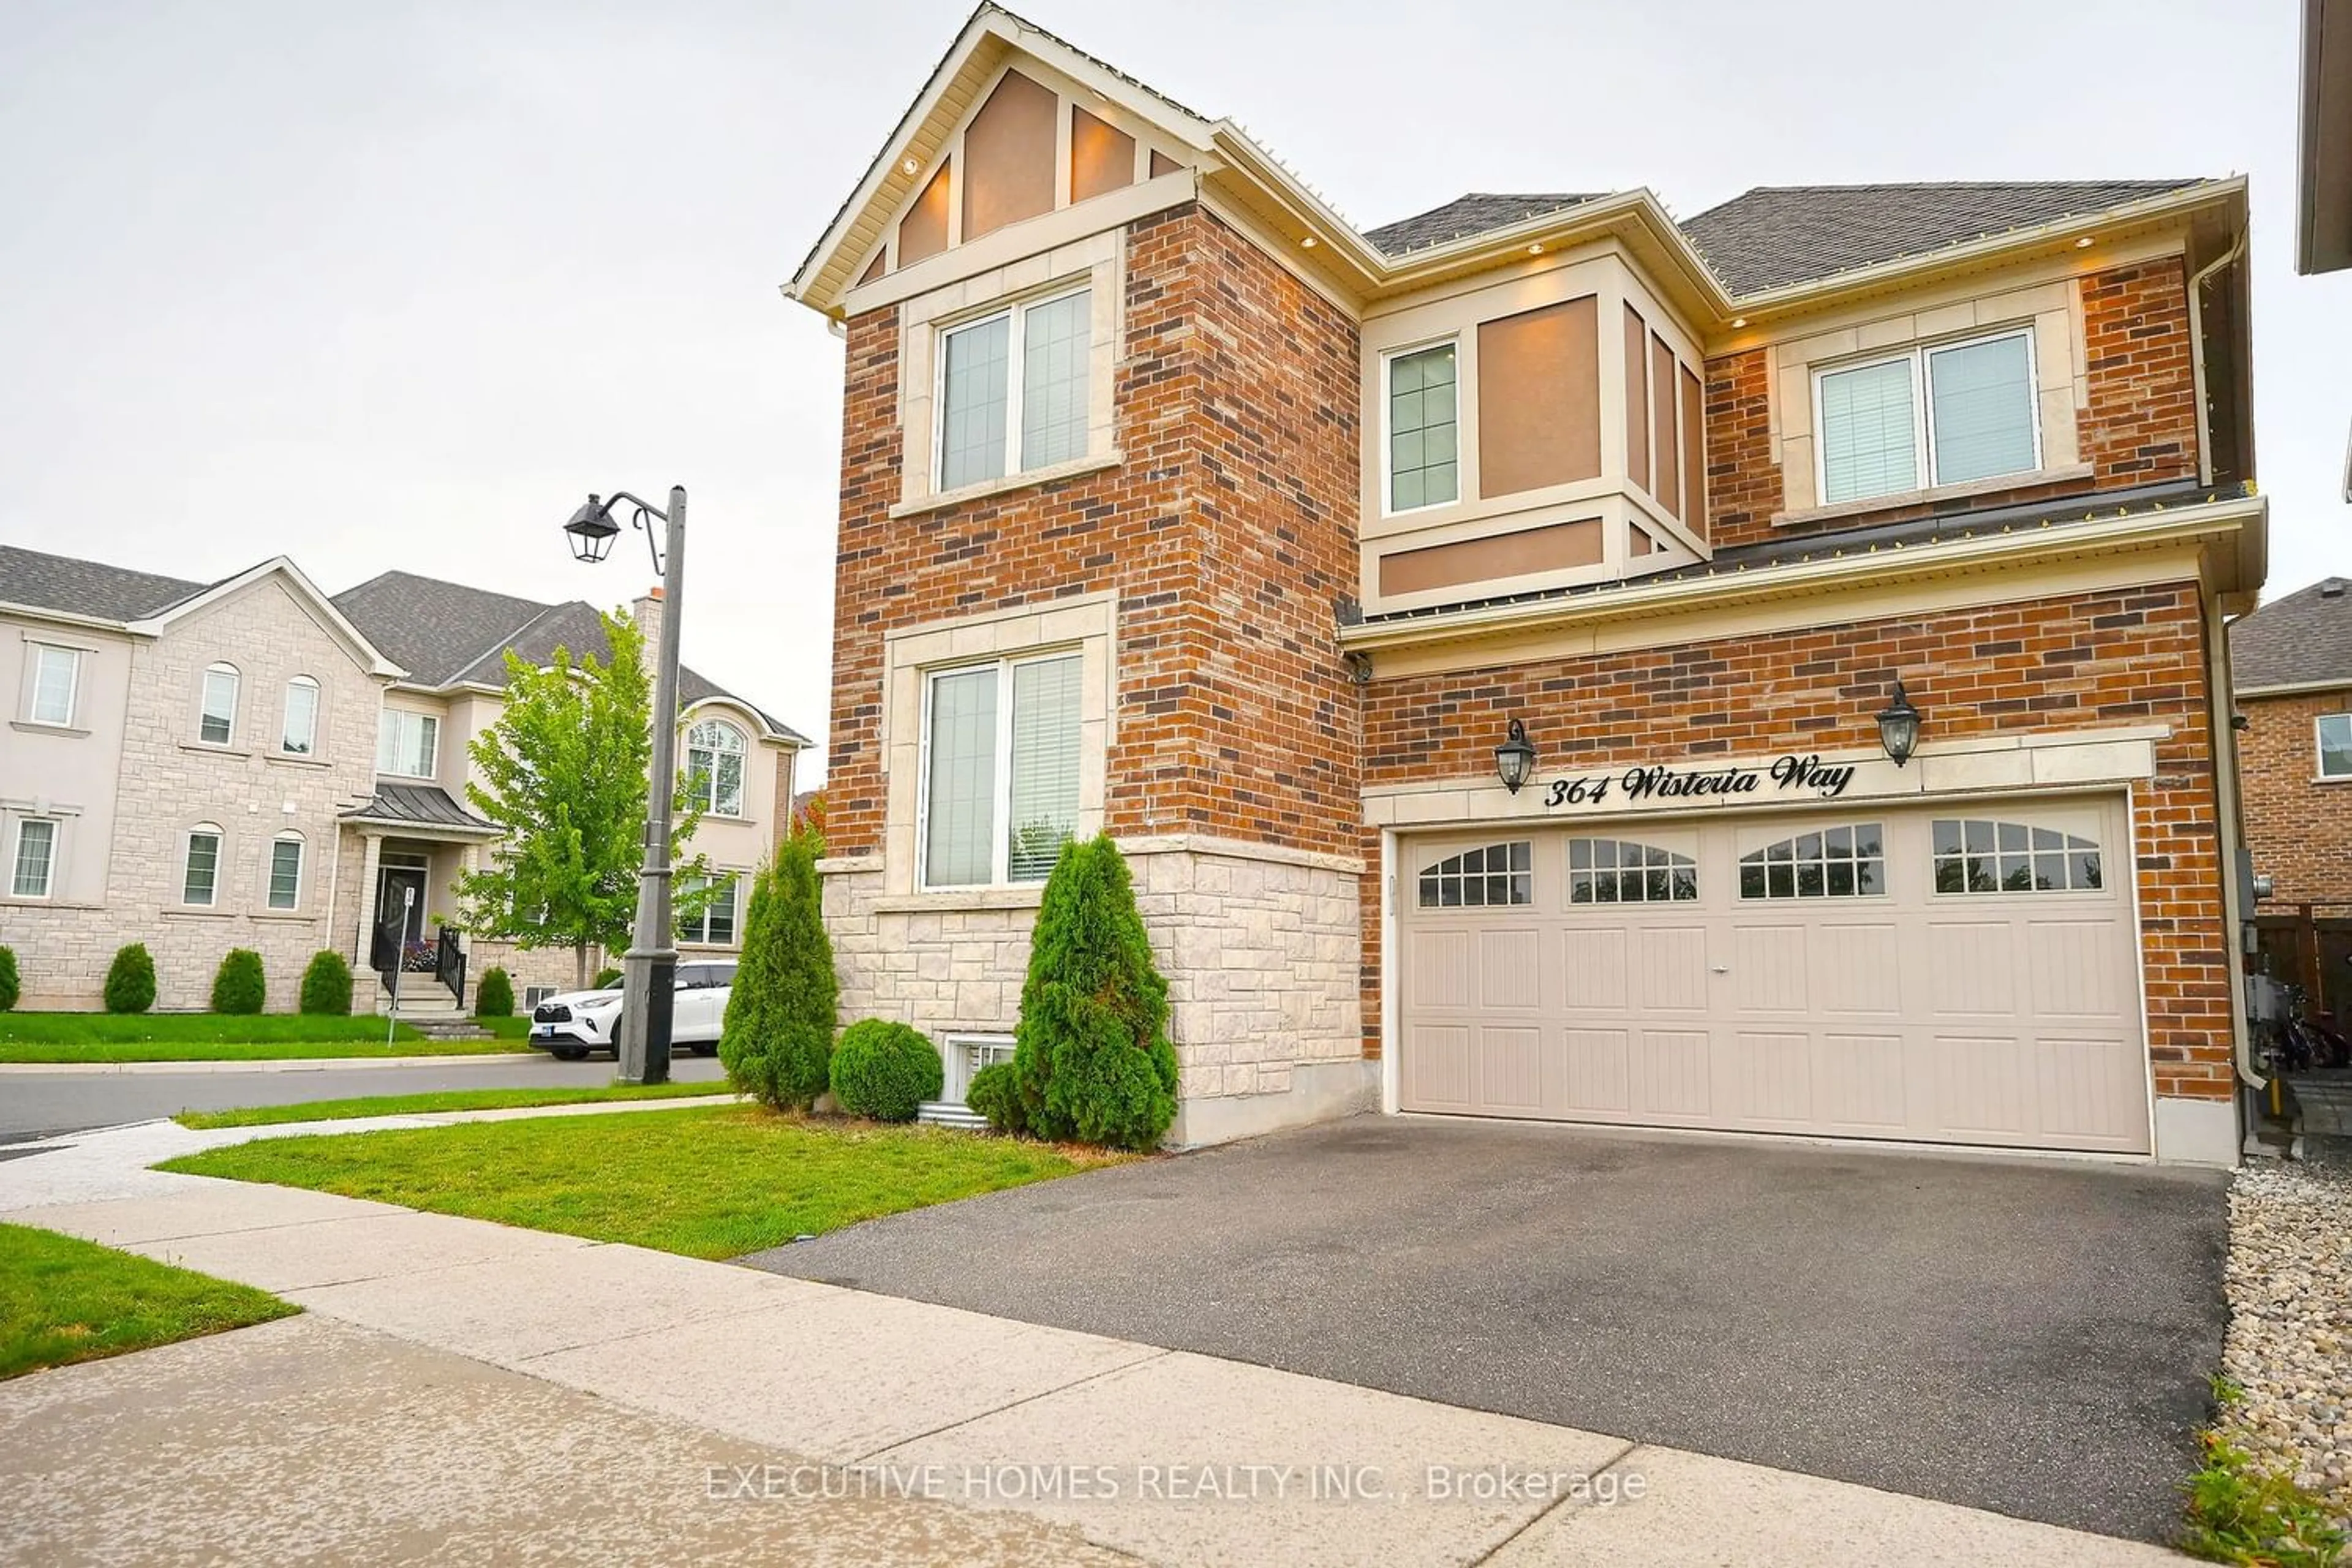 A pic from exterior of the house or condo for 364 Wisteria Way, Oakville Ontario L6M 0N3